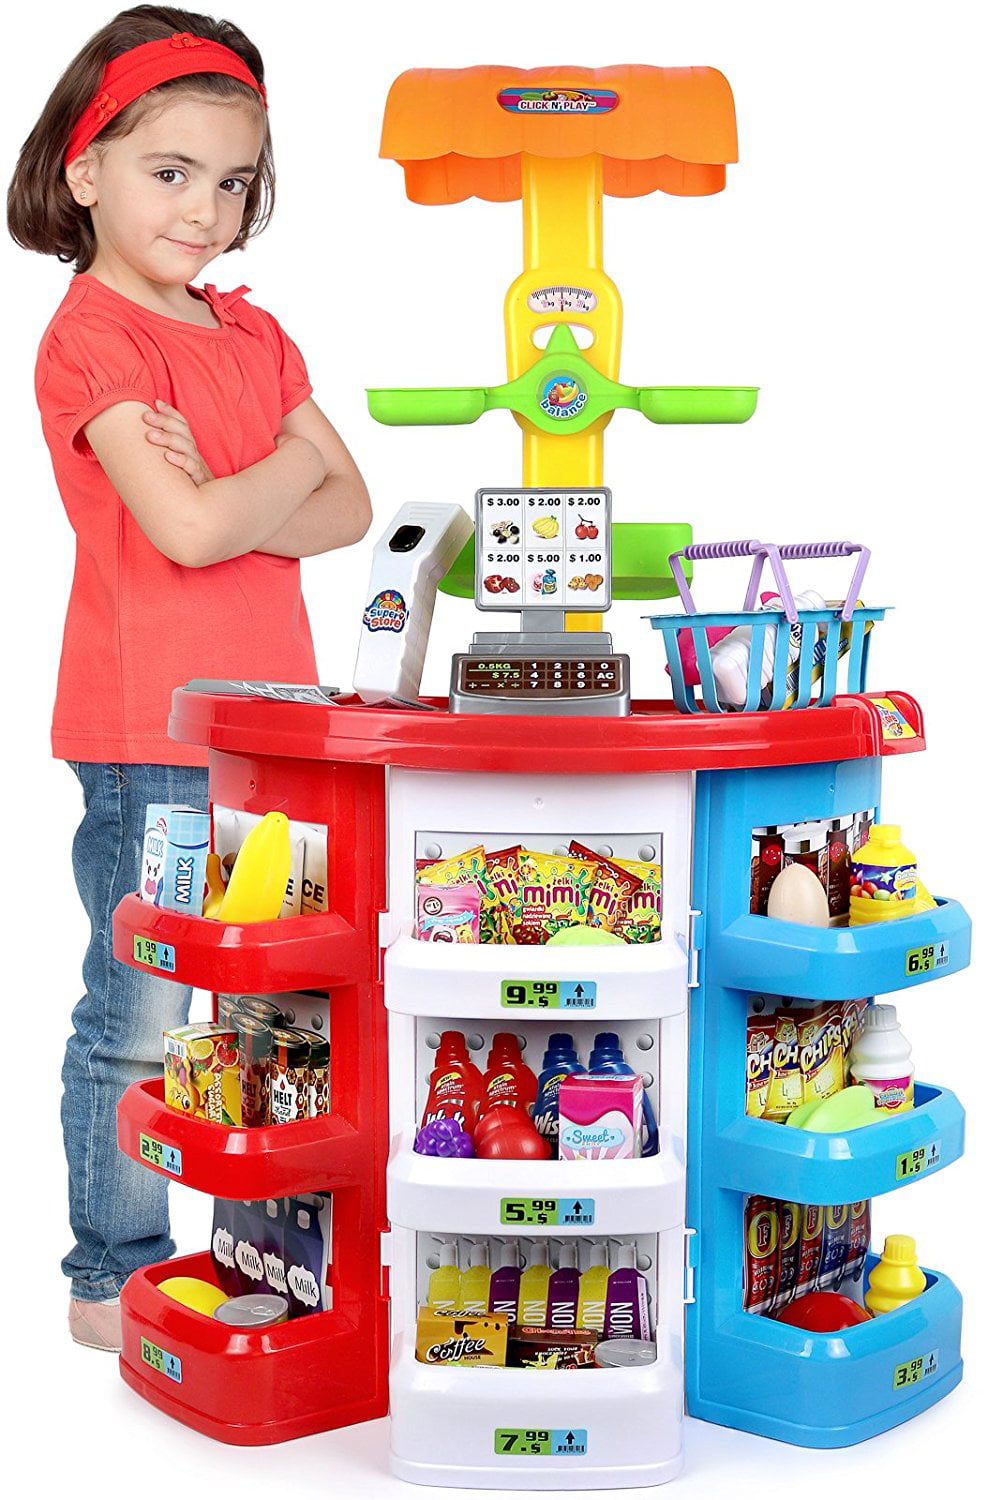 Grocery Store Interactive Imaginative Playtime Toys 18m+ Details about   Playgo Toys 15pc 